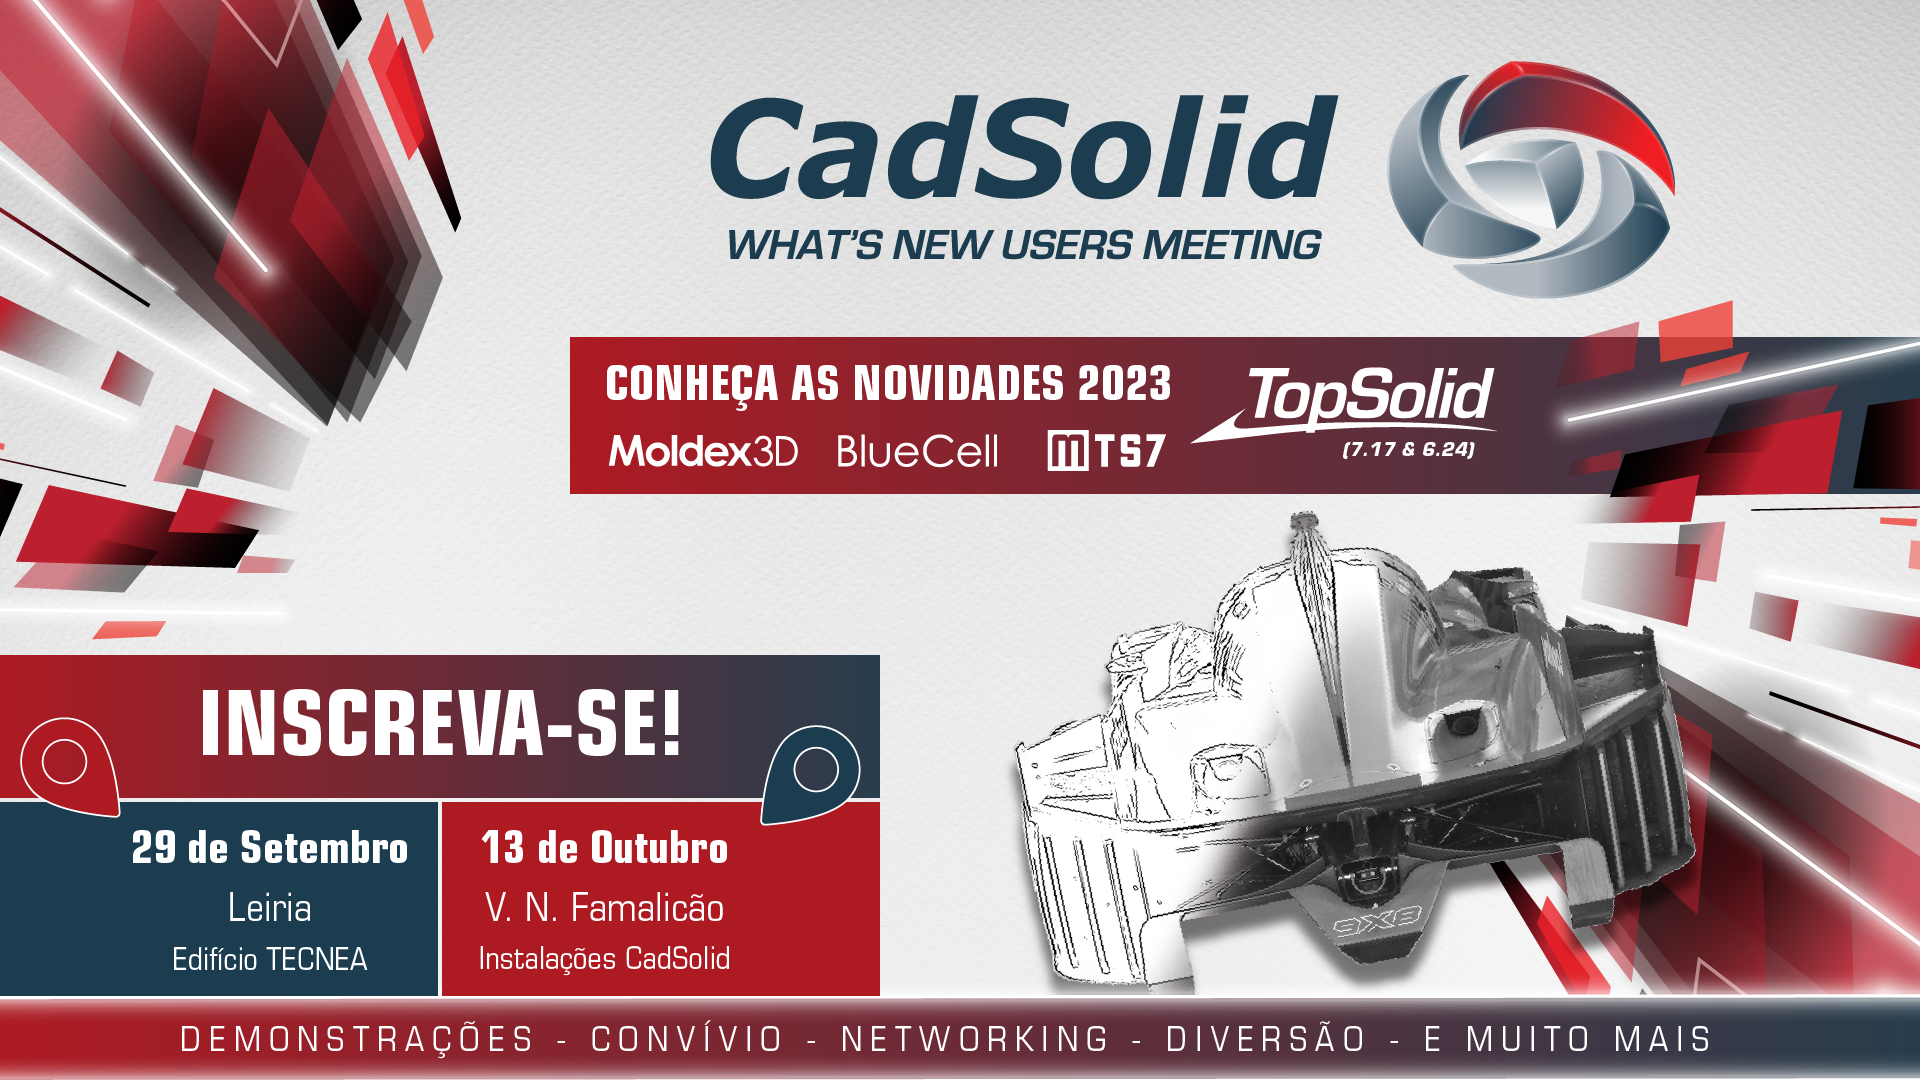 CadSolid What's New Users Meeting